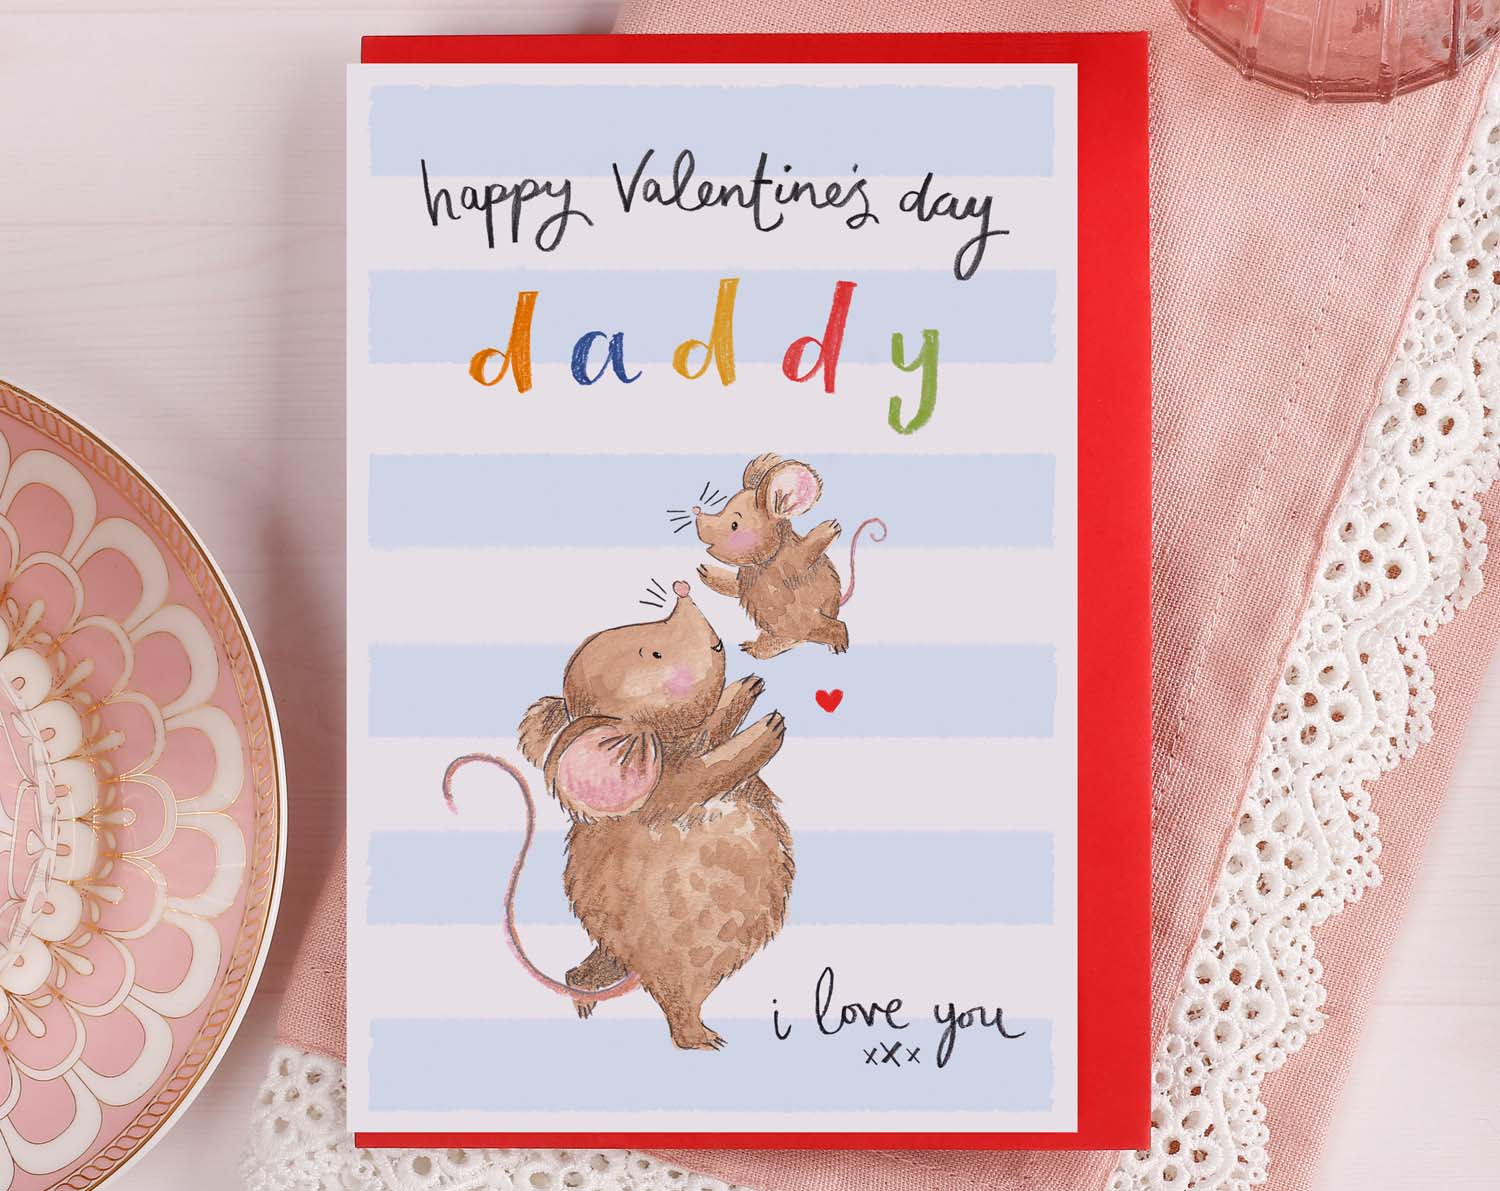 Sentimental Valentine Card For Daddy, From The Baby